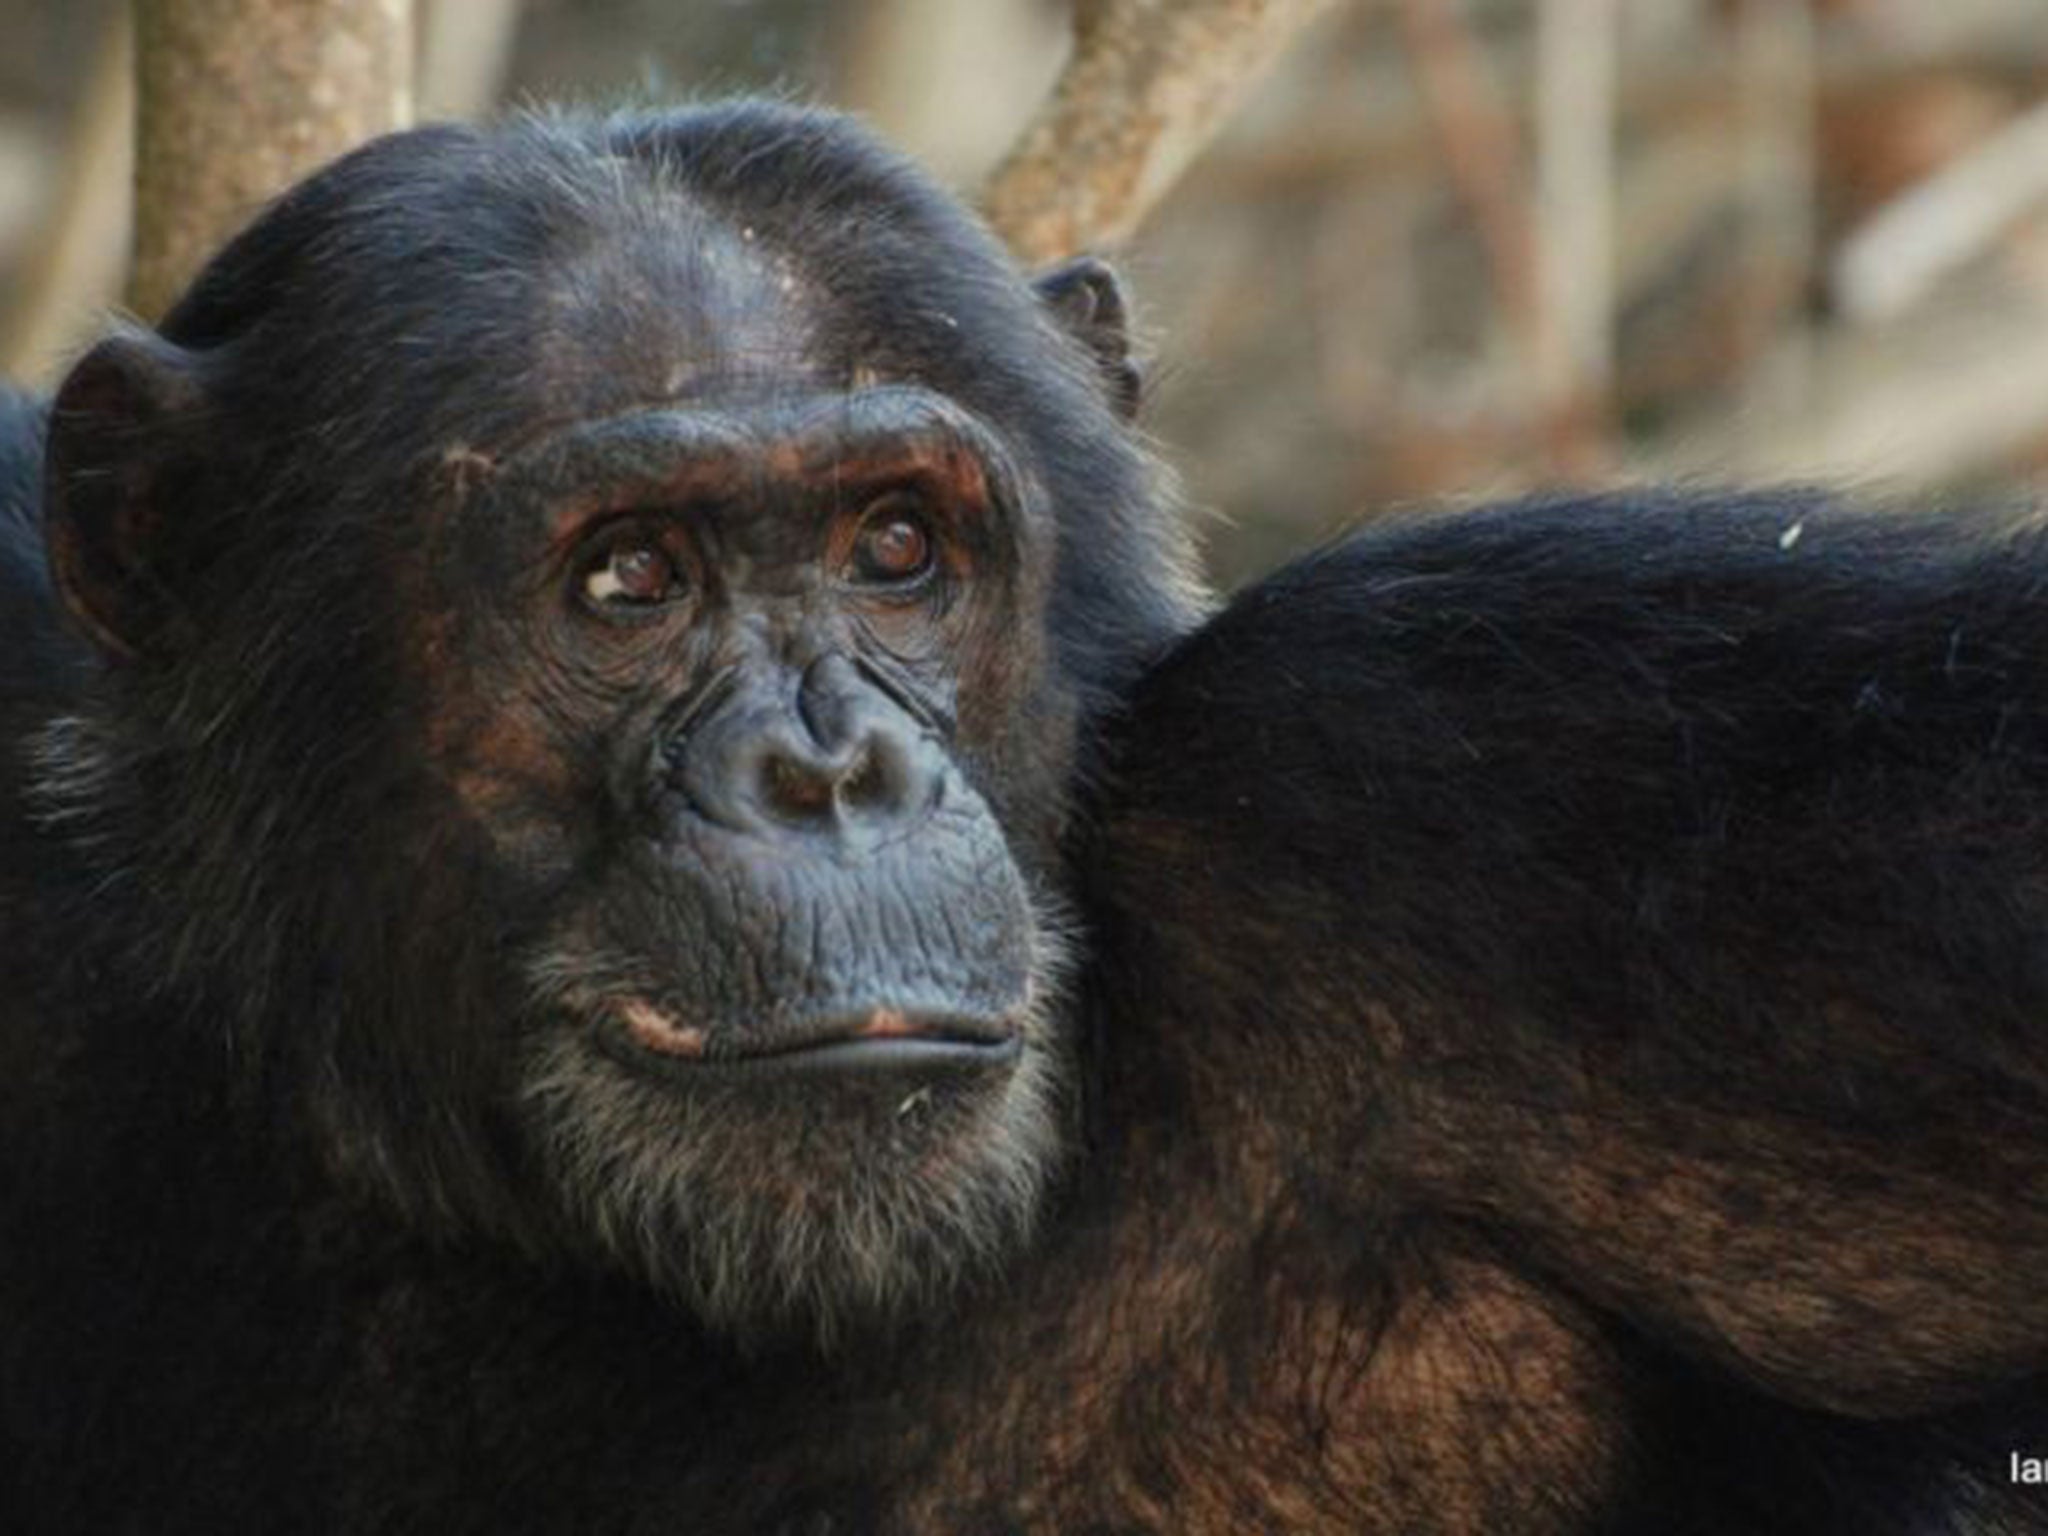 Chimpanzees pass on their skills in a way similar way as humans do